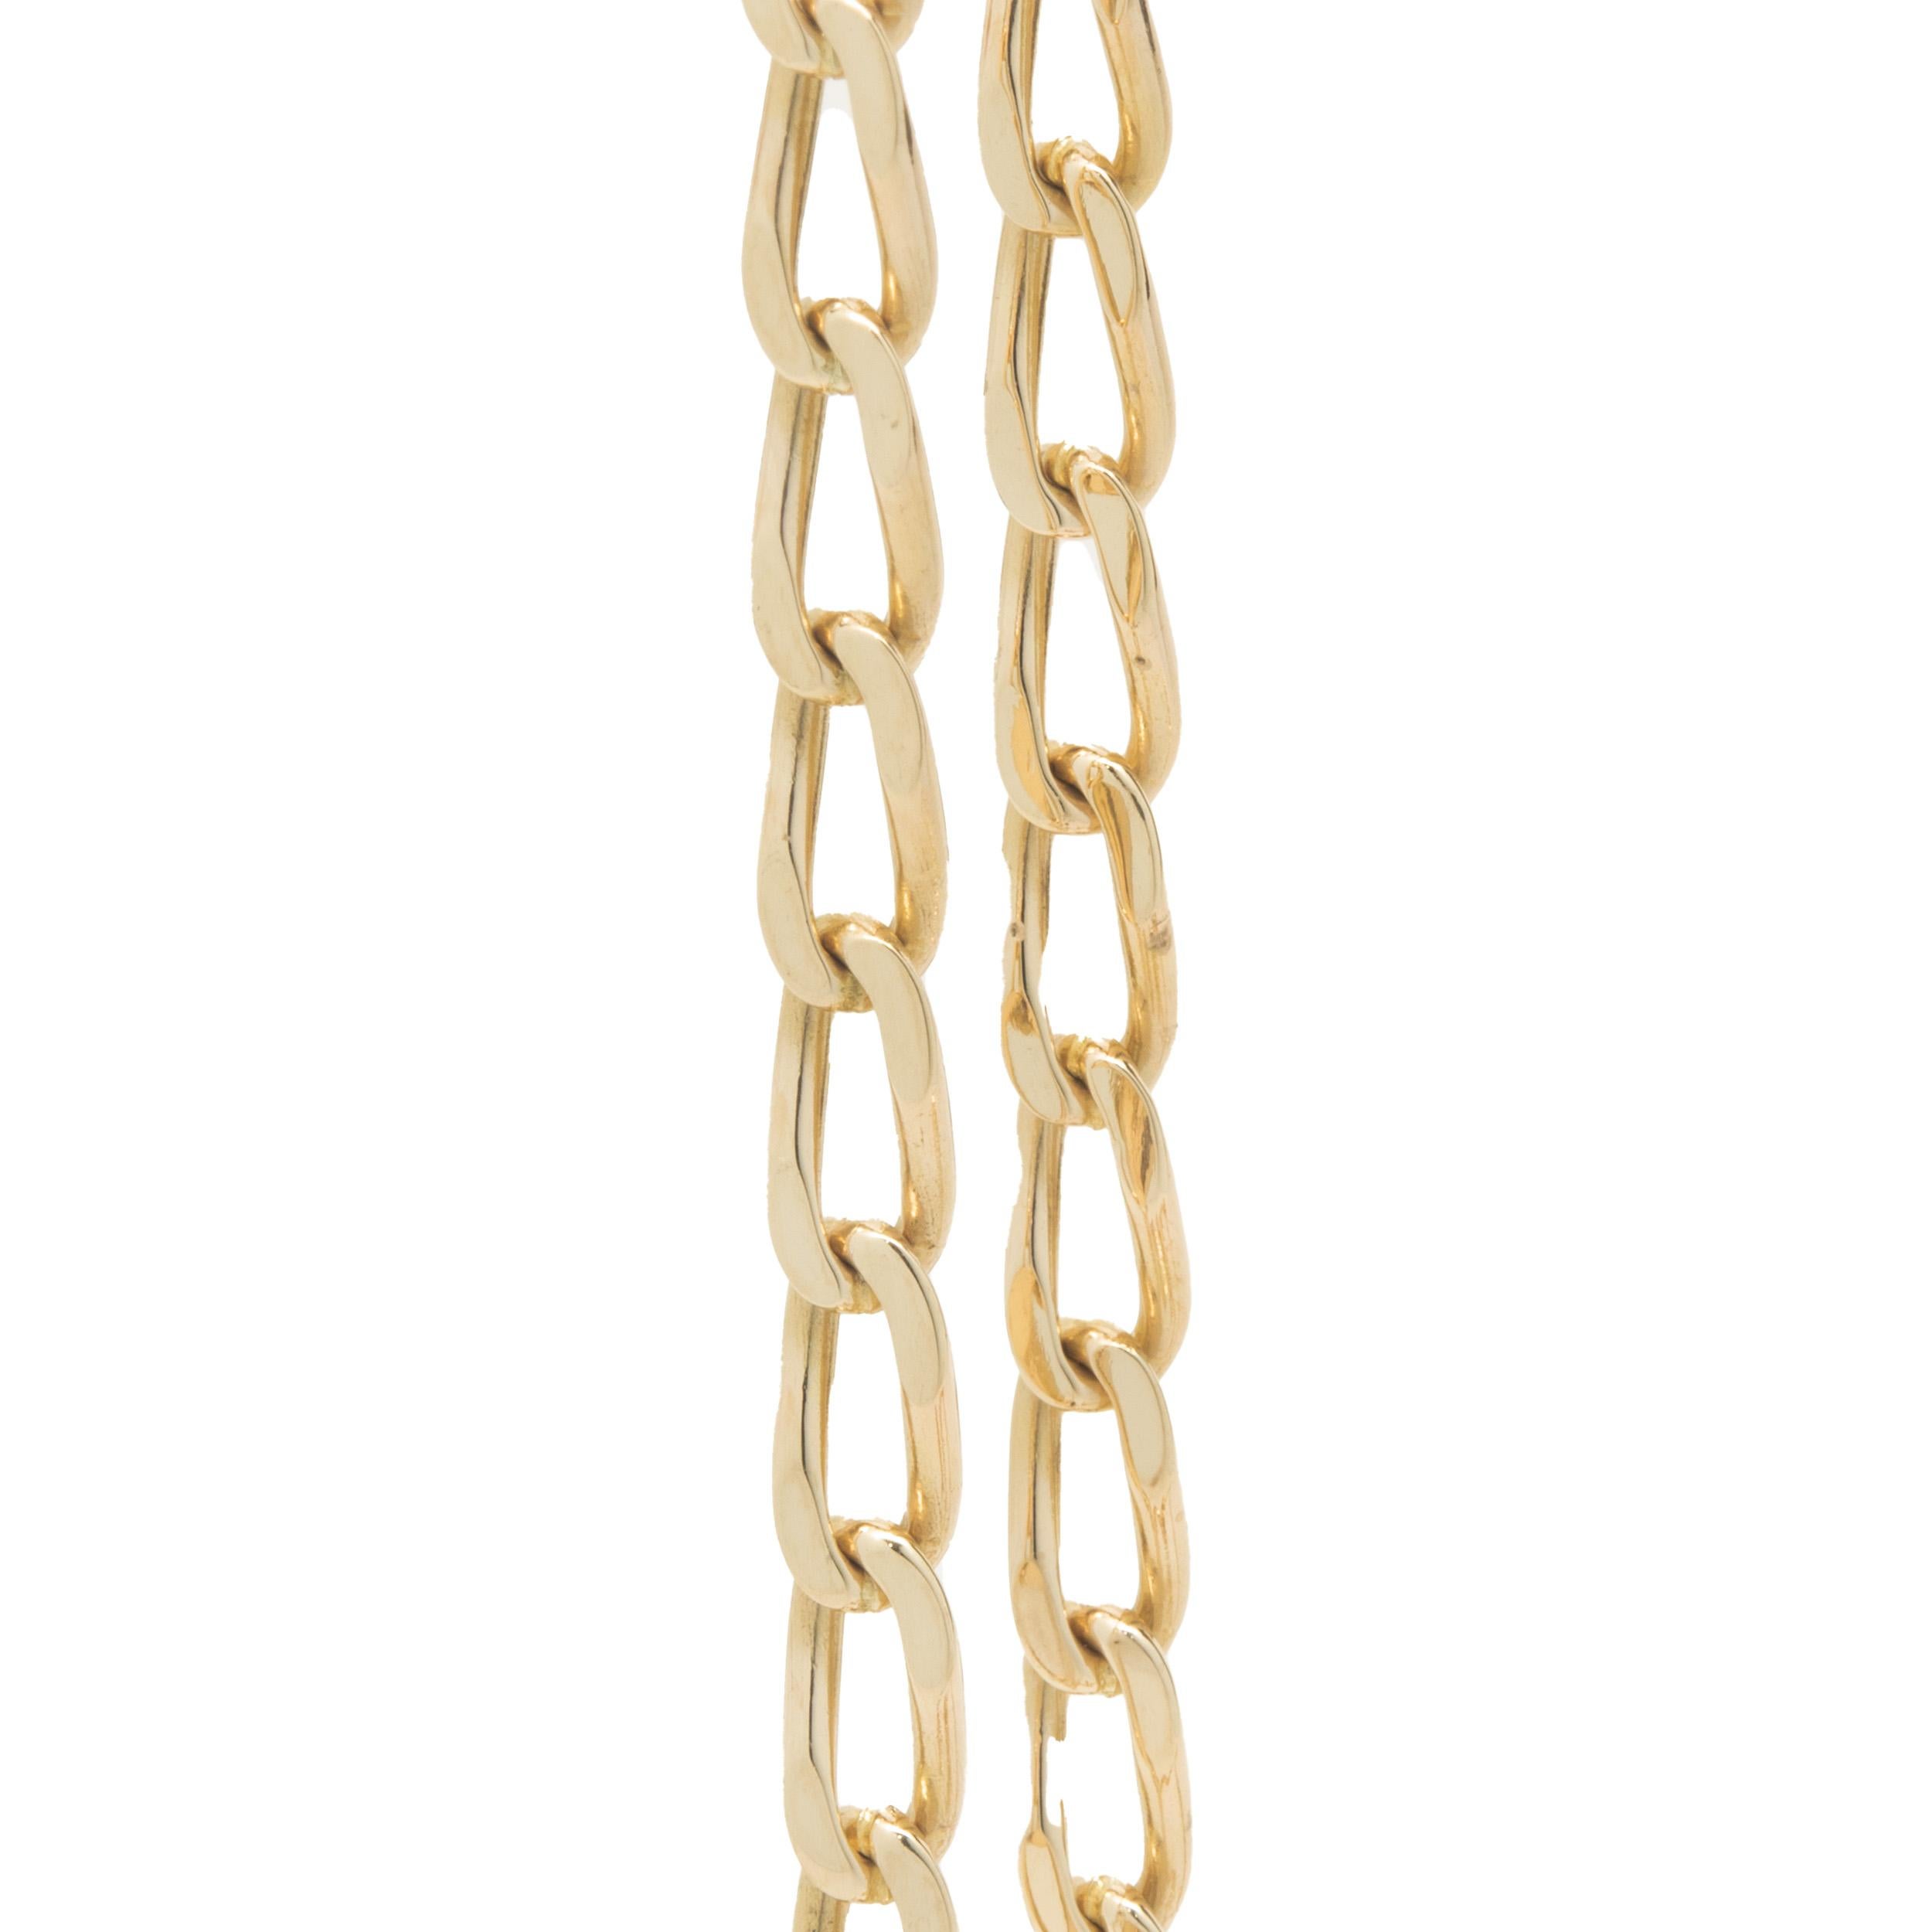 Material: 18K yellow gold
Dimension: necklace measures 20-inches in length
Weight: 28.34 grams
